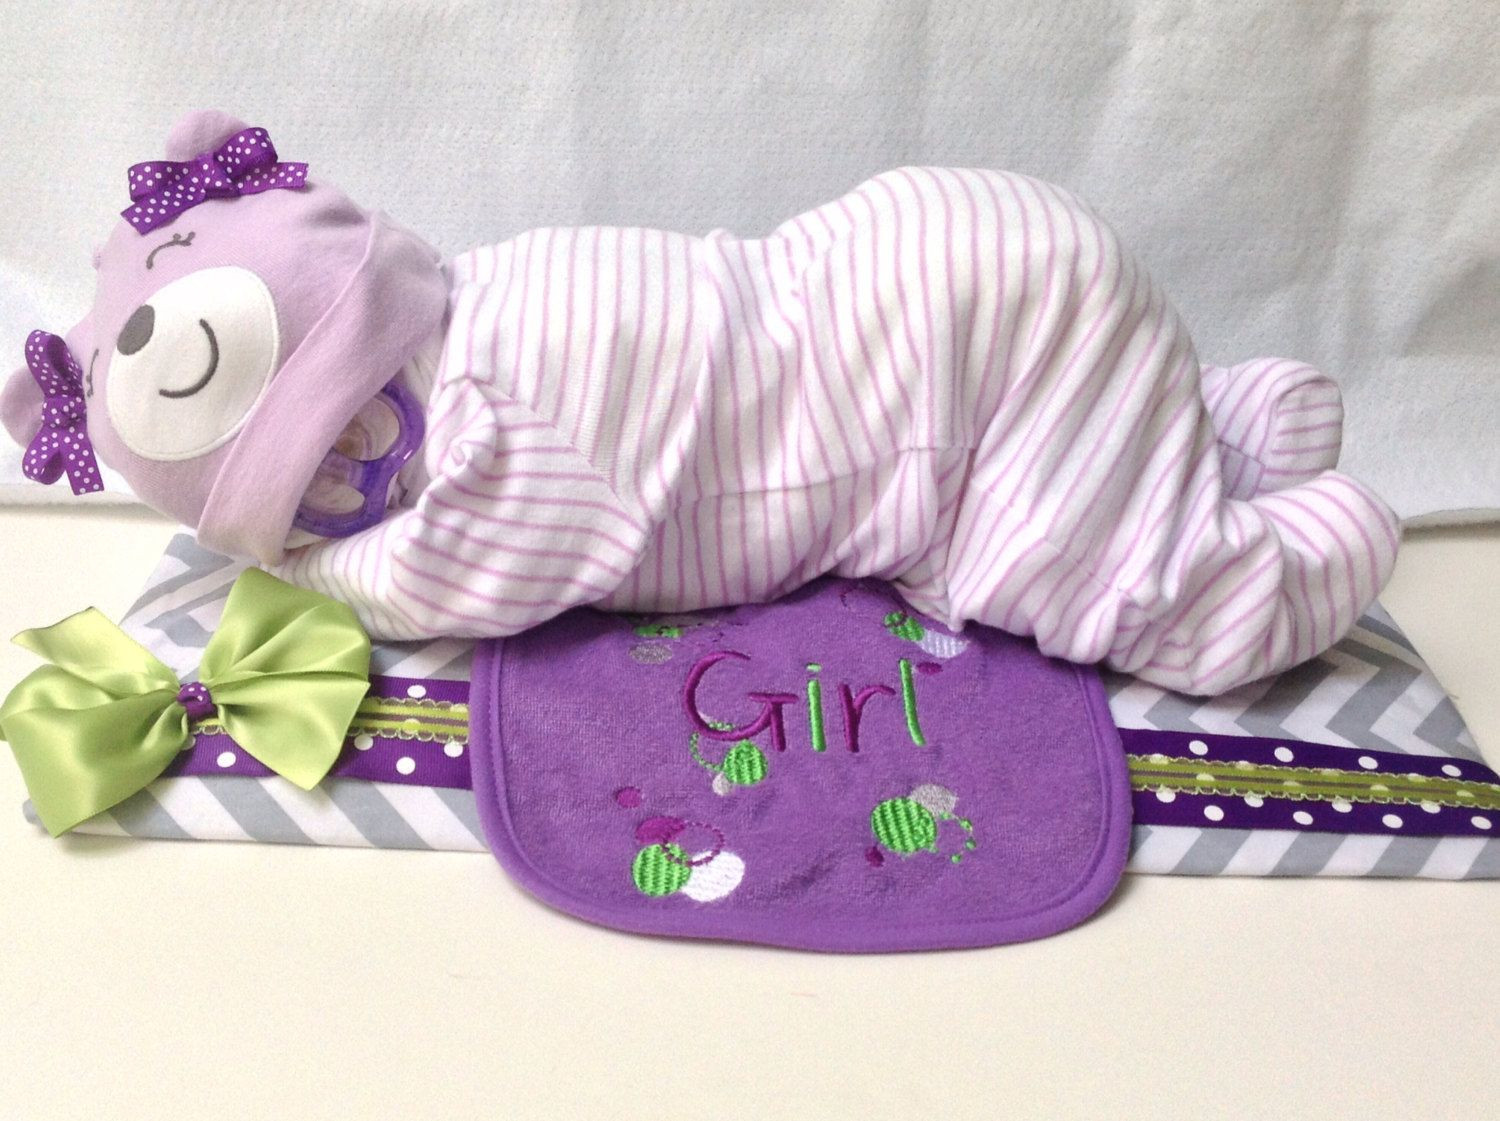 Baby Shower Gifts Made With Diapers
 Many people want to know how to make their own sleeping